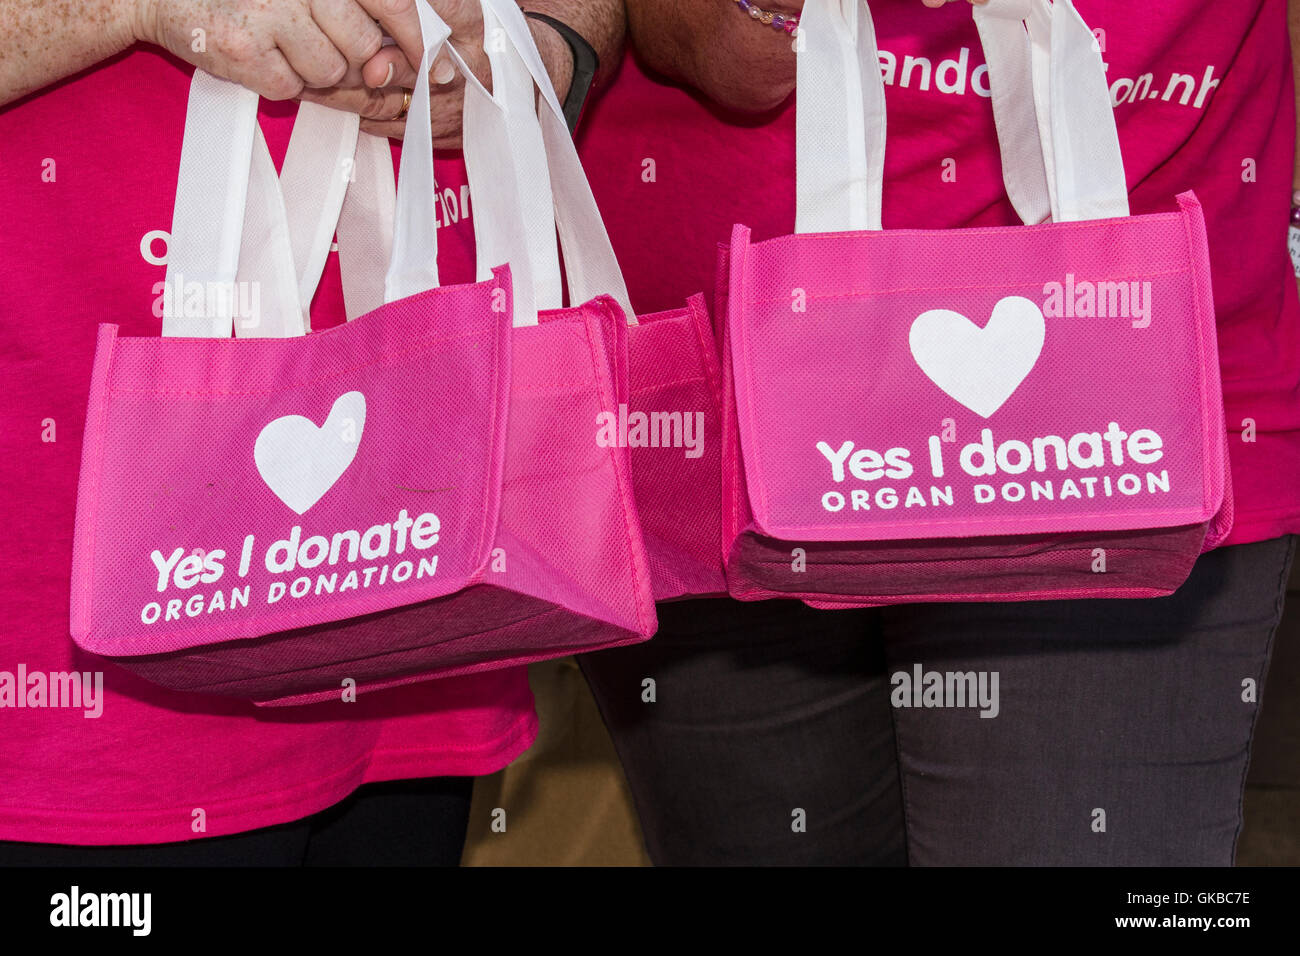 'Yes I donate' pink bags. Young Evie Pownall, girl 6 years old carrying reusable pink bag recommending registering for organ donation, Southport, UK Stock Photo